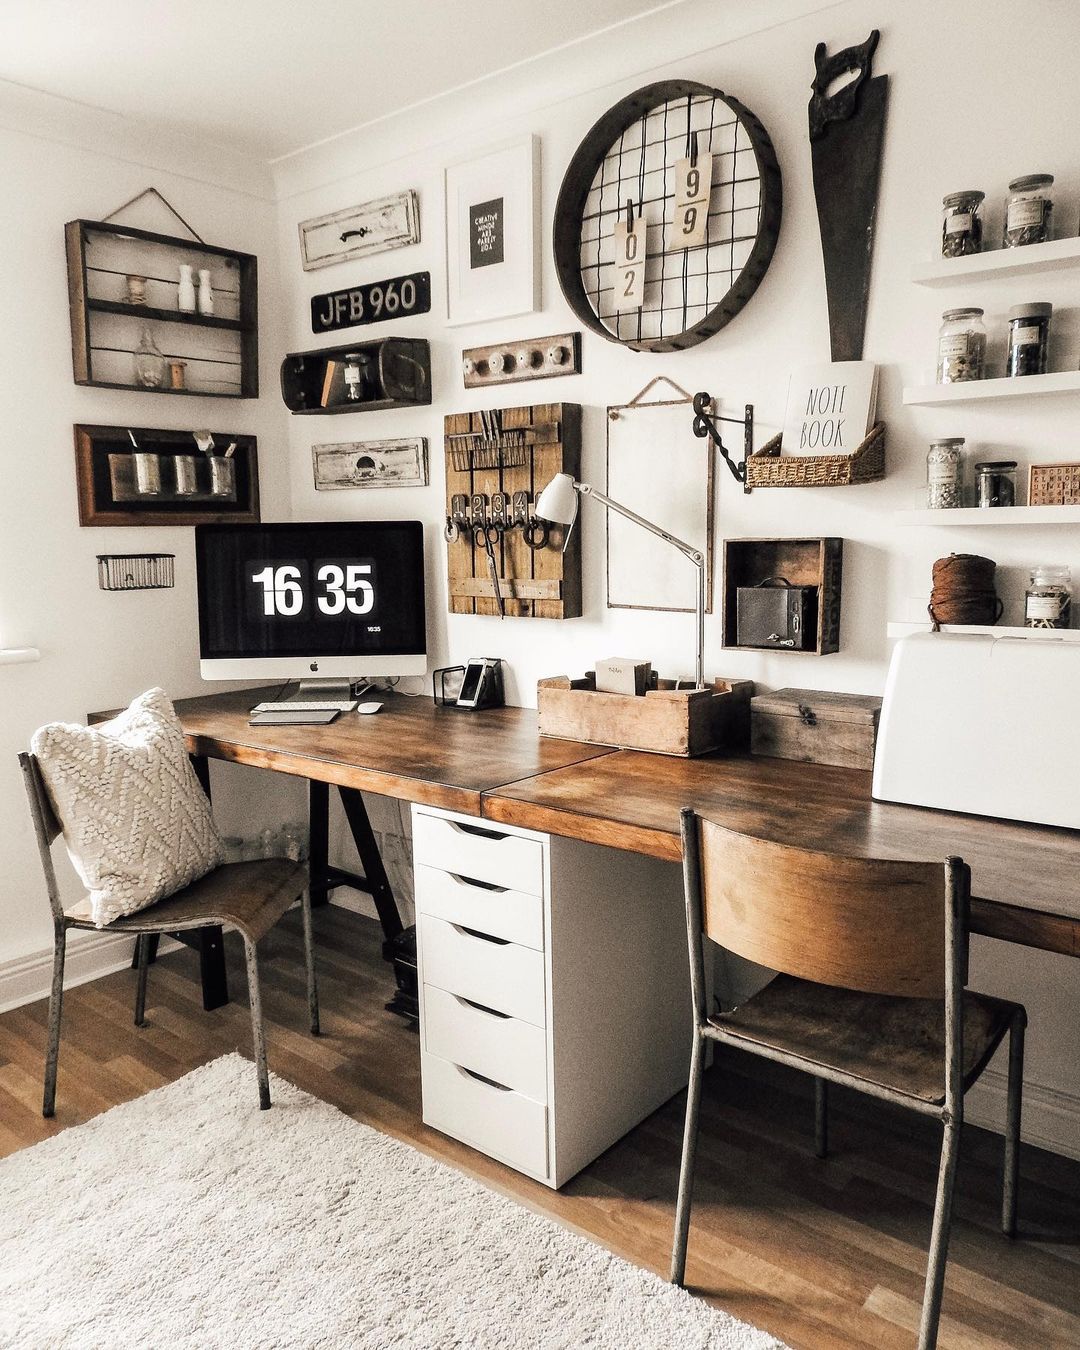 Create a Functional Rustic Workspace with Reclaimed Materials